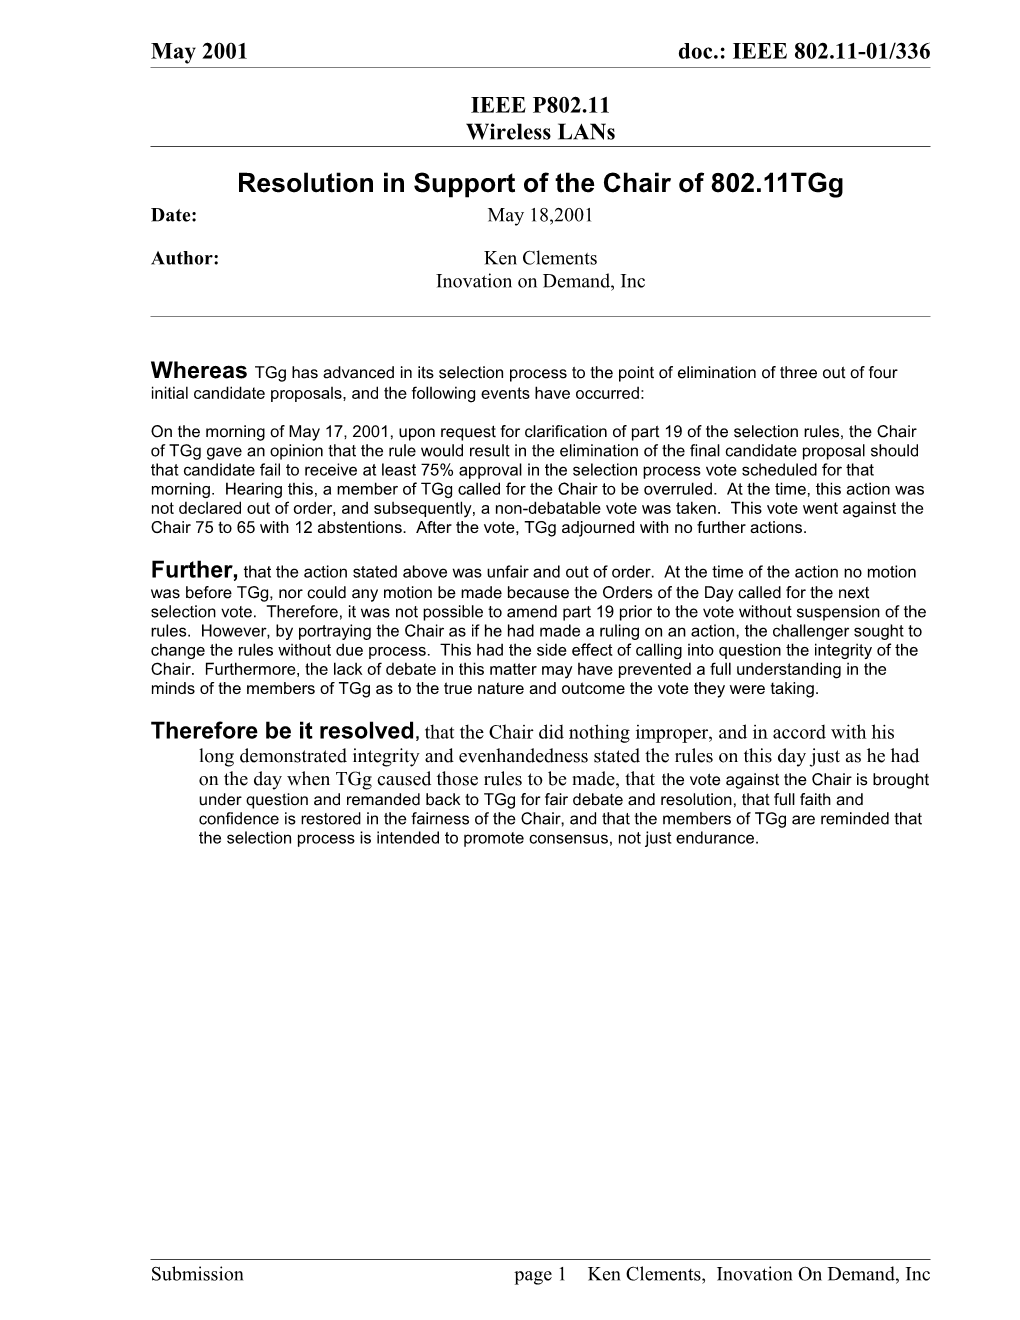 Resolution in Support of the Chair of 802.11Tgg